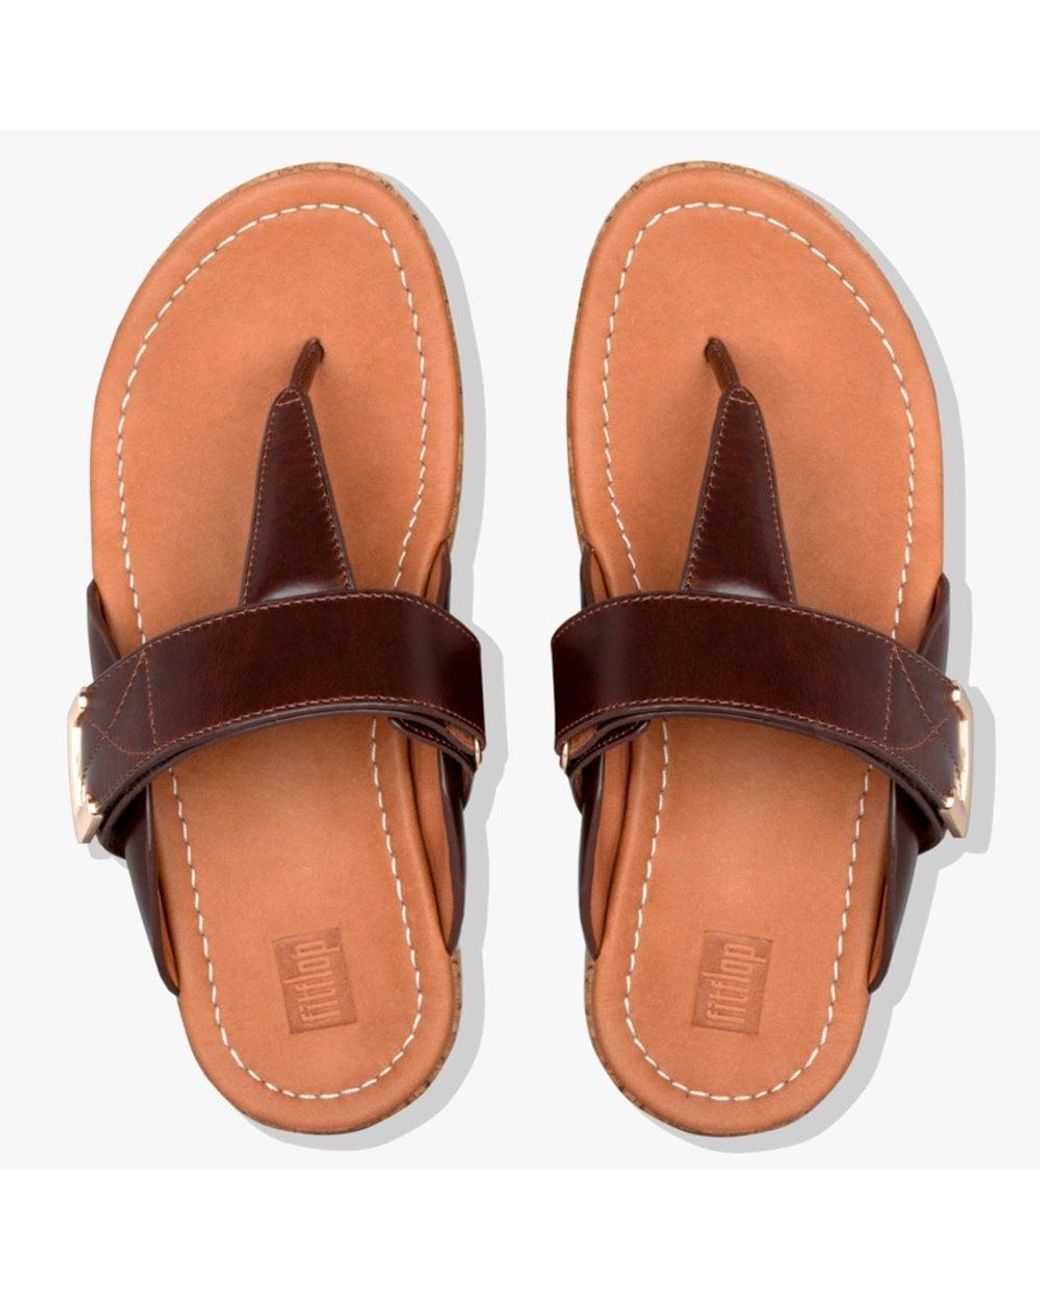 Fitflop Remi Chocolate Brown Leather Adjustable Toe Post Sandals | Lyst